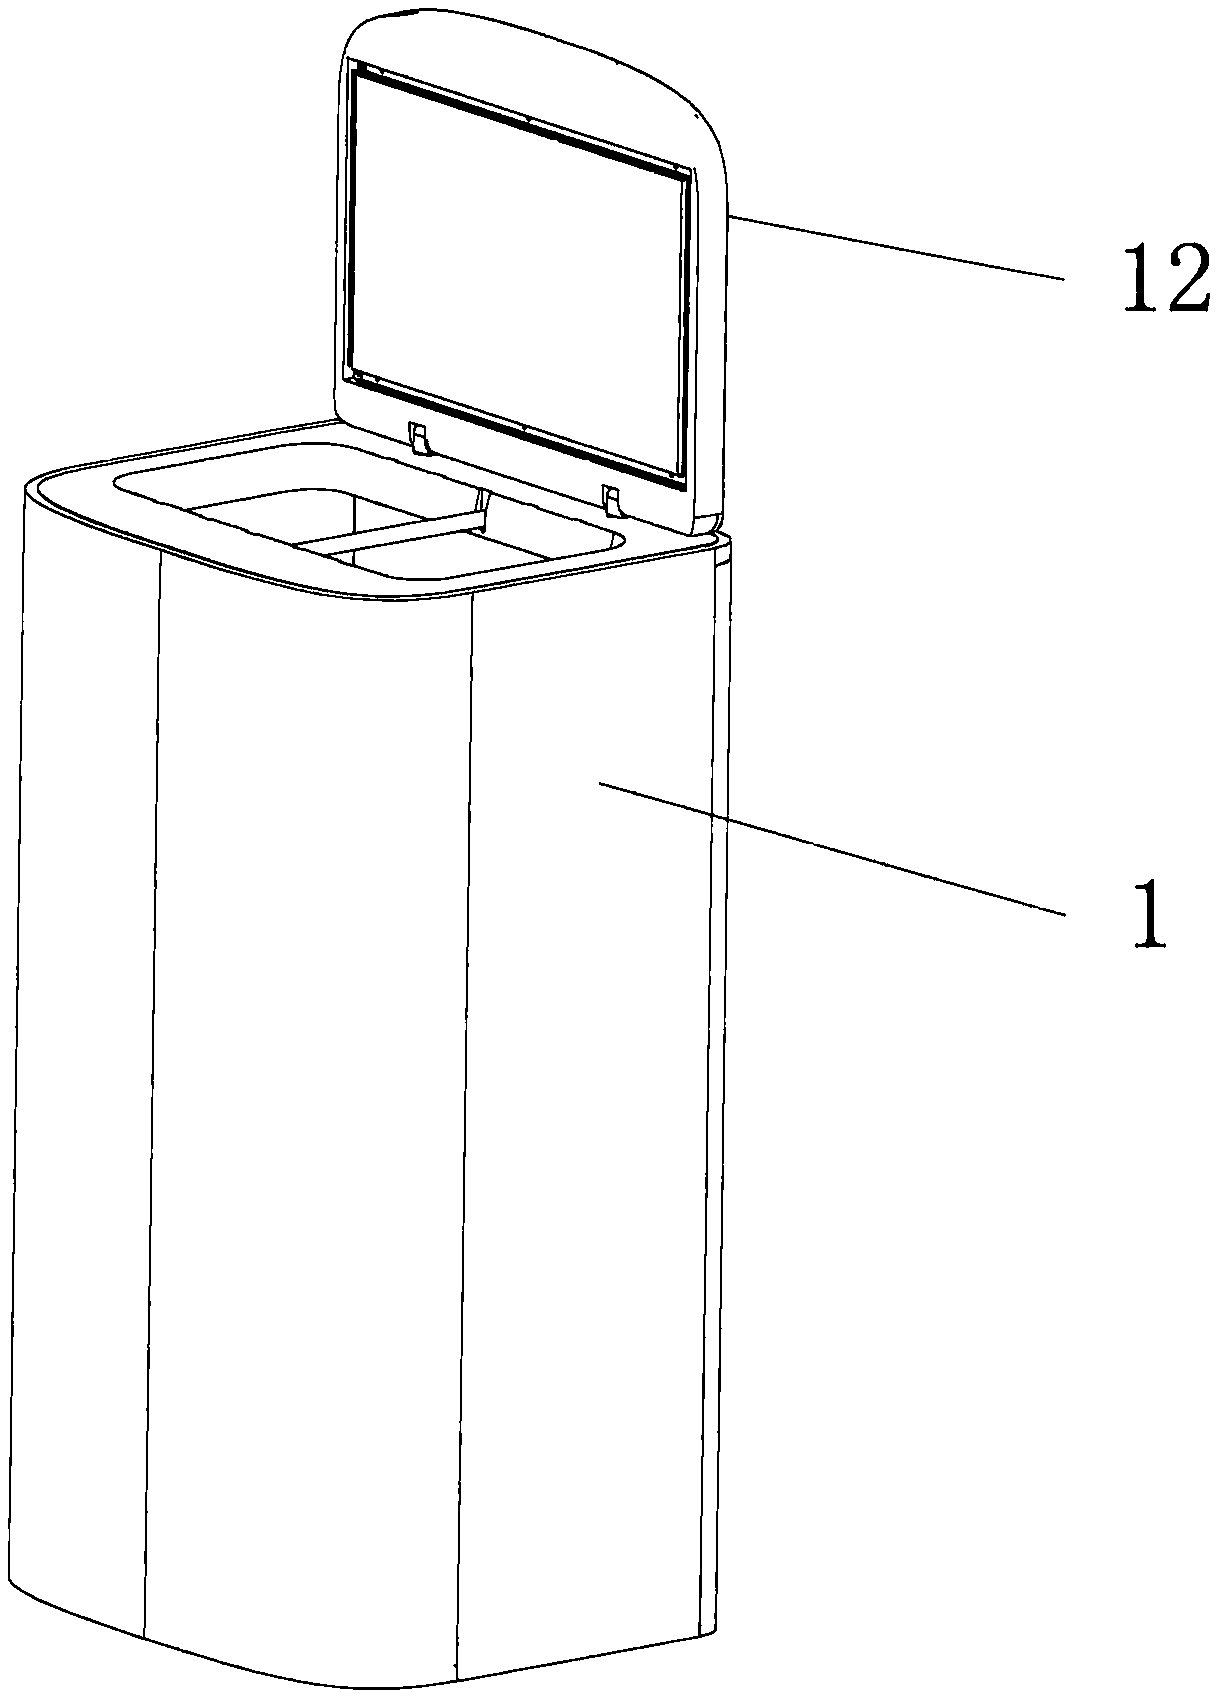 Clothes drying machine with upper opening for vertically hanging clothes